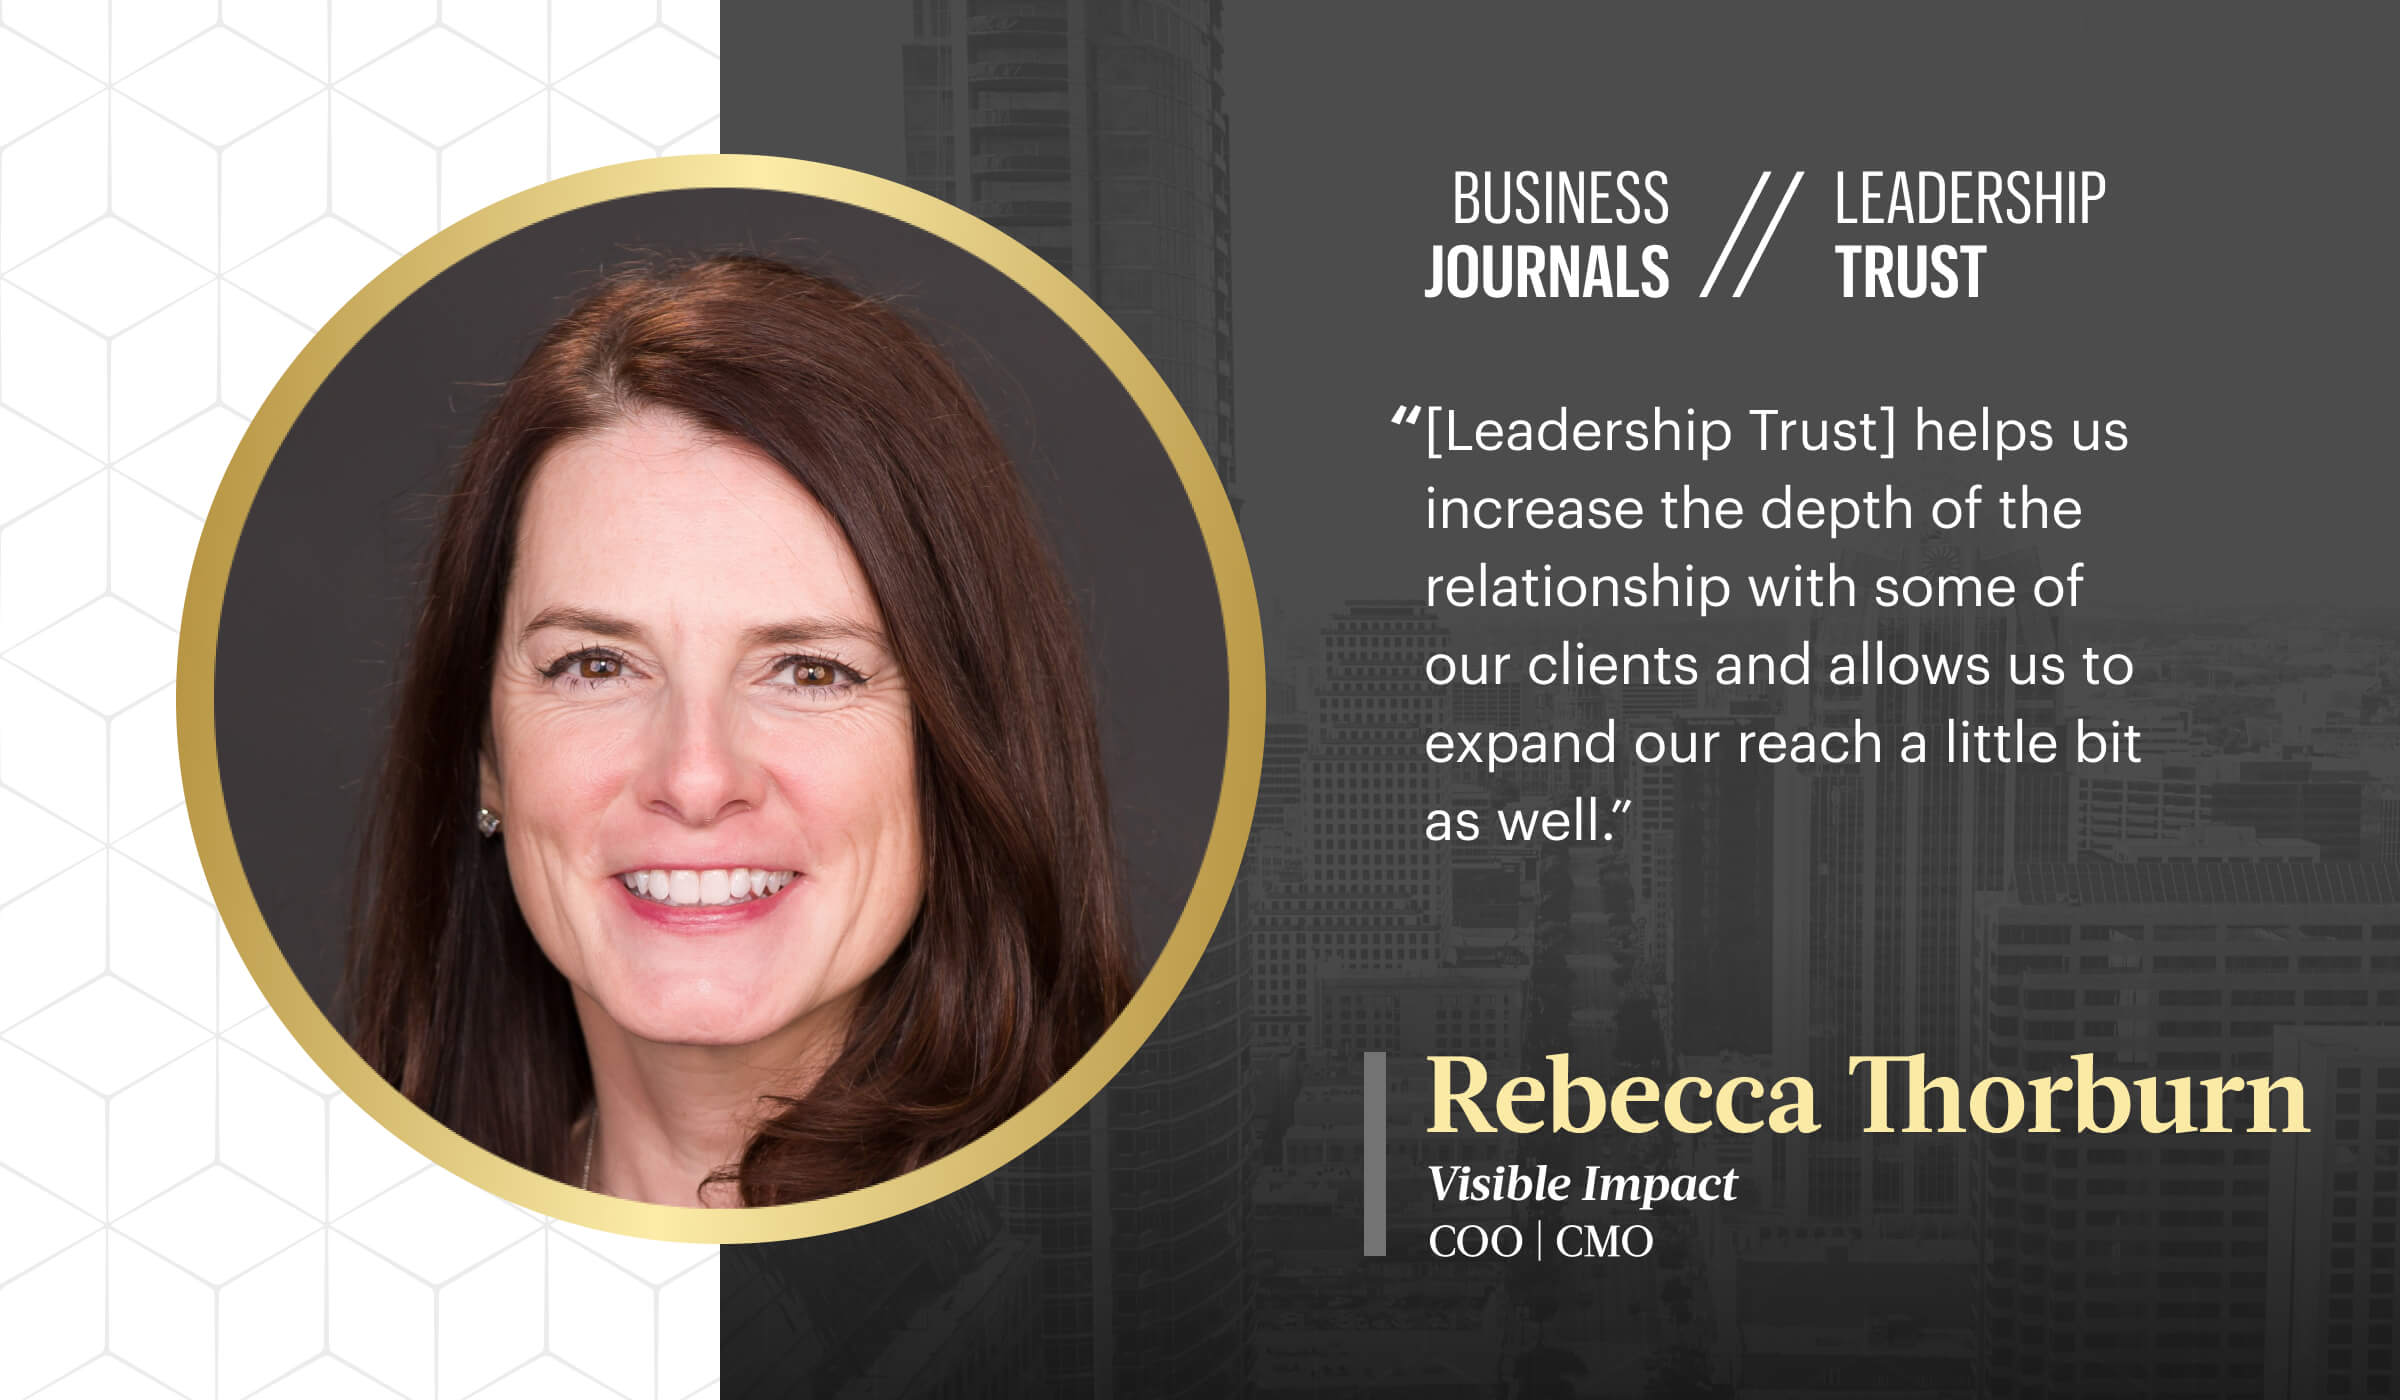 Through Leadership Trust Content, Rebecca Thorburn Connects More Deeply With Clients